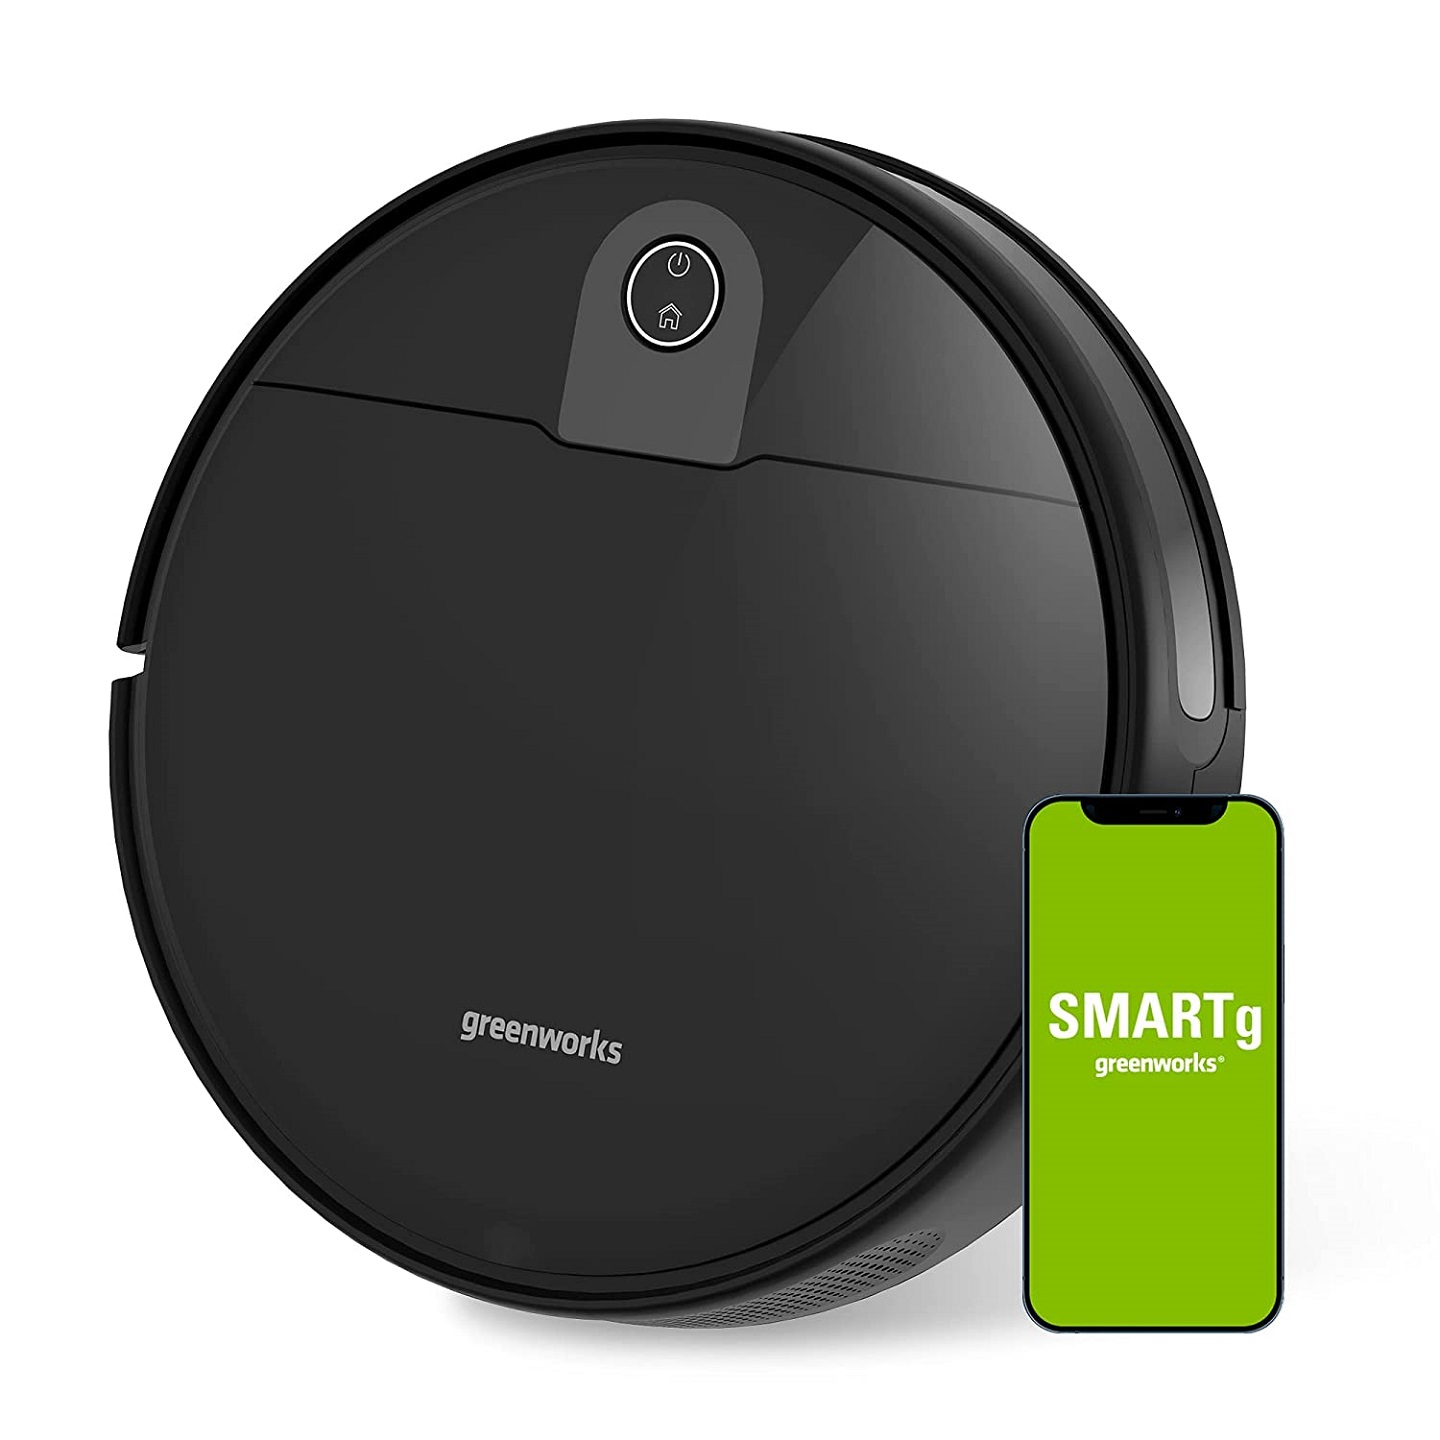 This Robotic Vacuum Features Adjustable Suction And Smart Mapping Technology